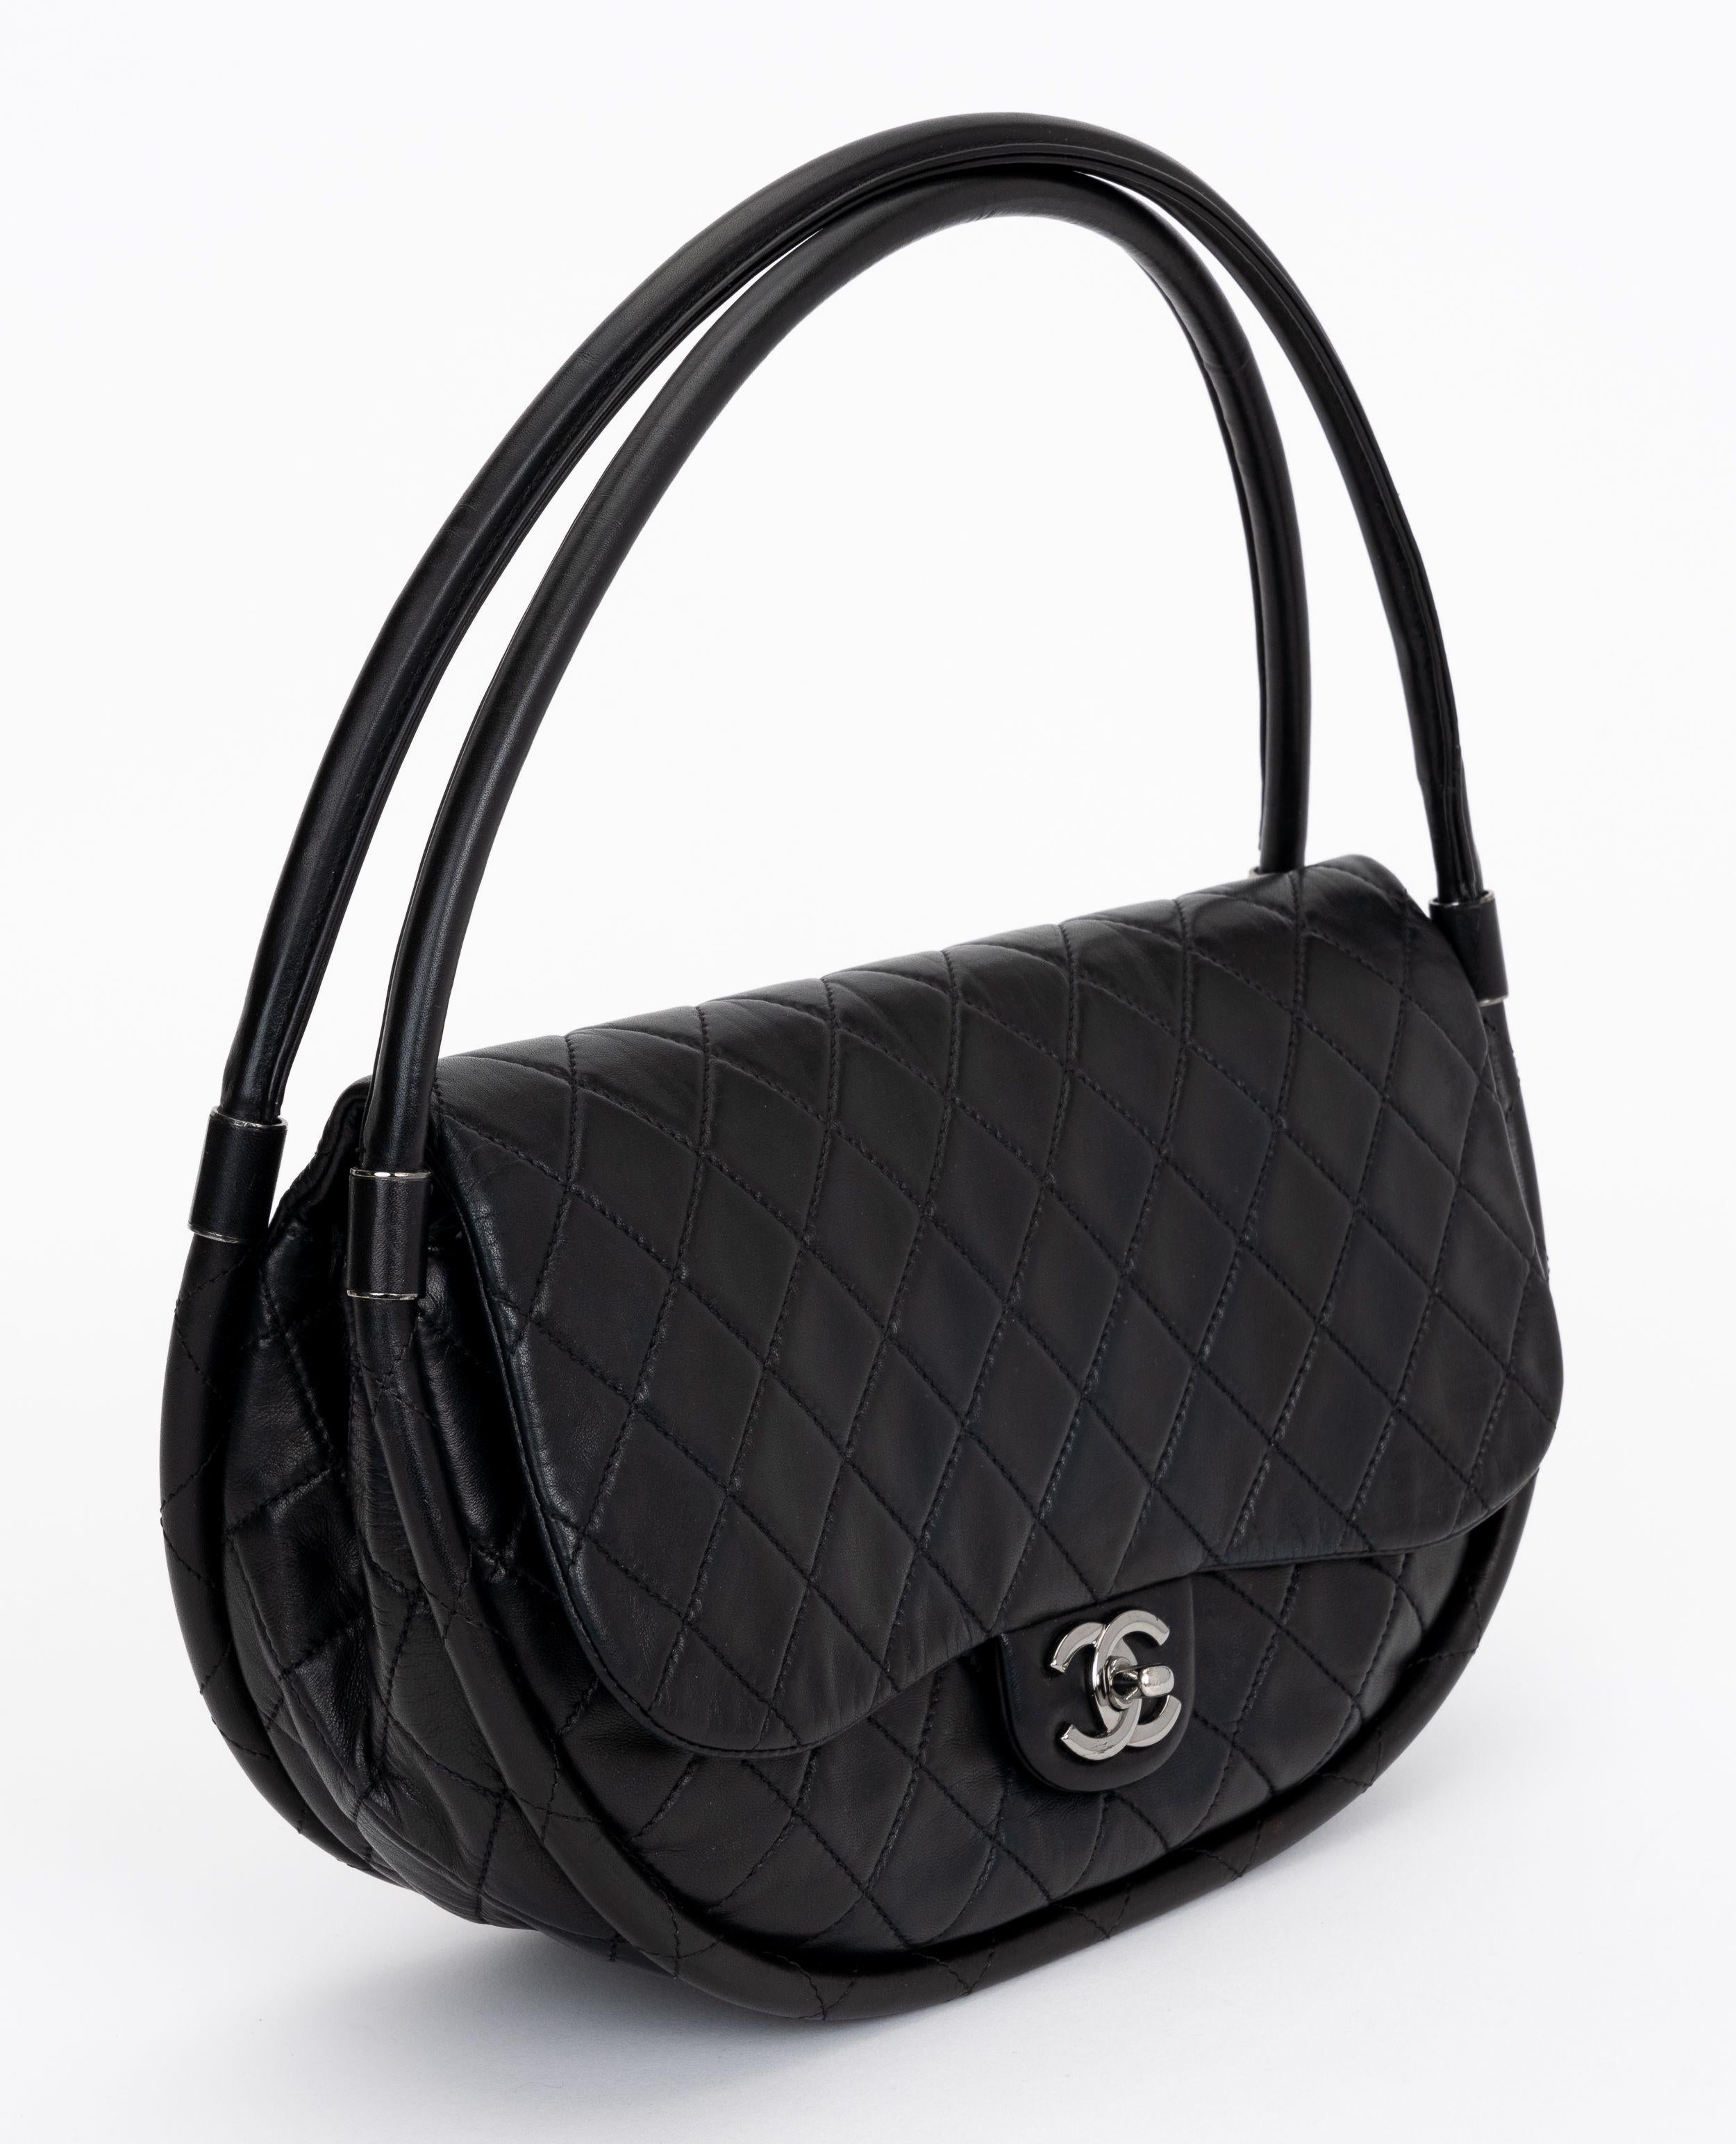 The Chanel rare and collectible Hula Hoop is made with black quilted leather and silver tone hardware. It features a flap with an interlocking closure with CC logo. 
Collection 17. Comes with hologram, booklet, id card and original dust cover.